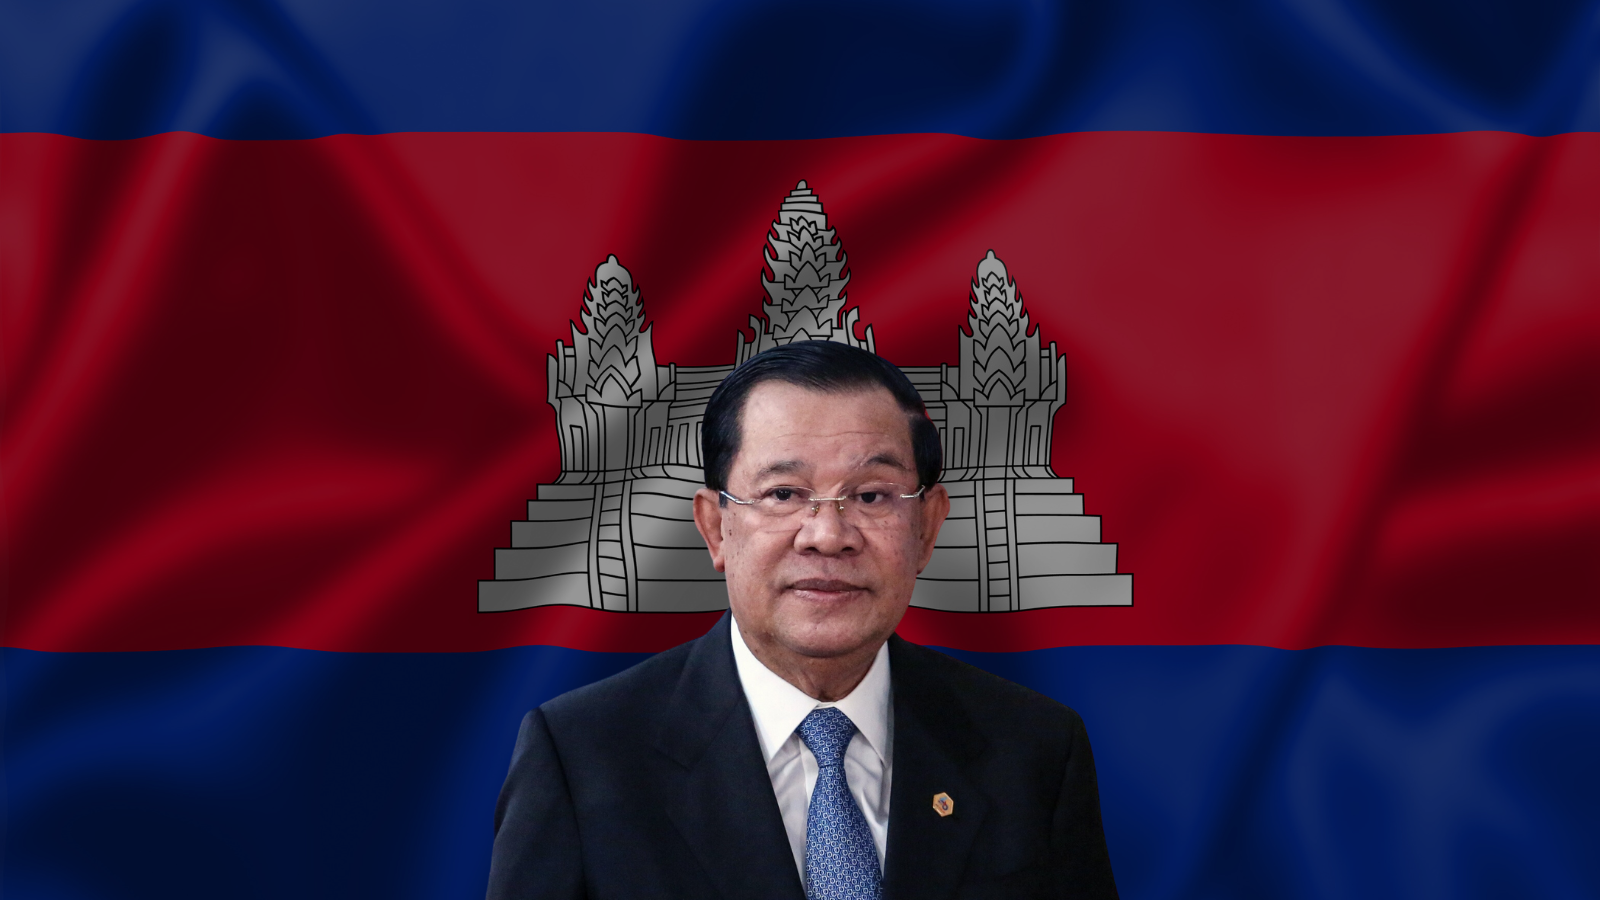 Vacation is over for Cambodian strongman Hun Sen